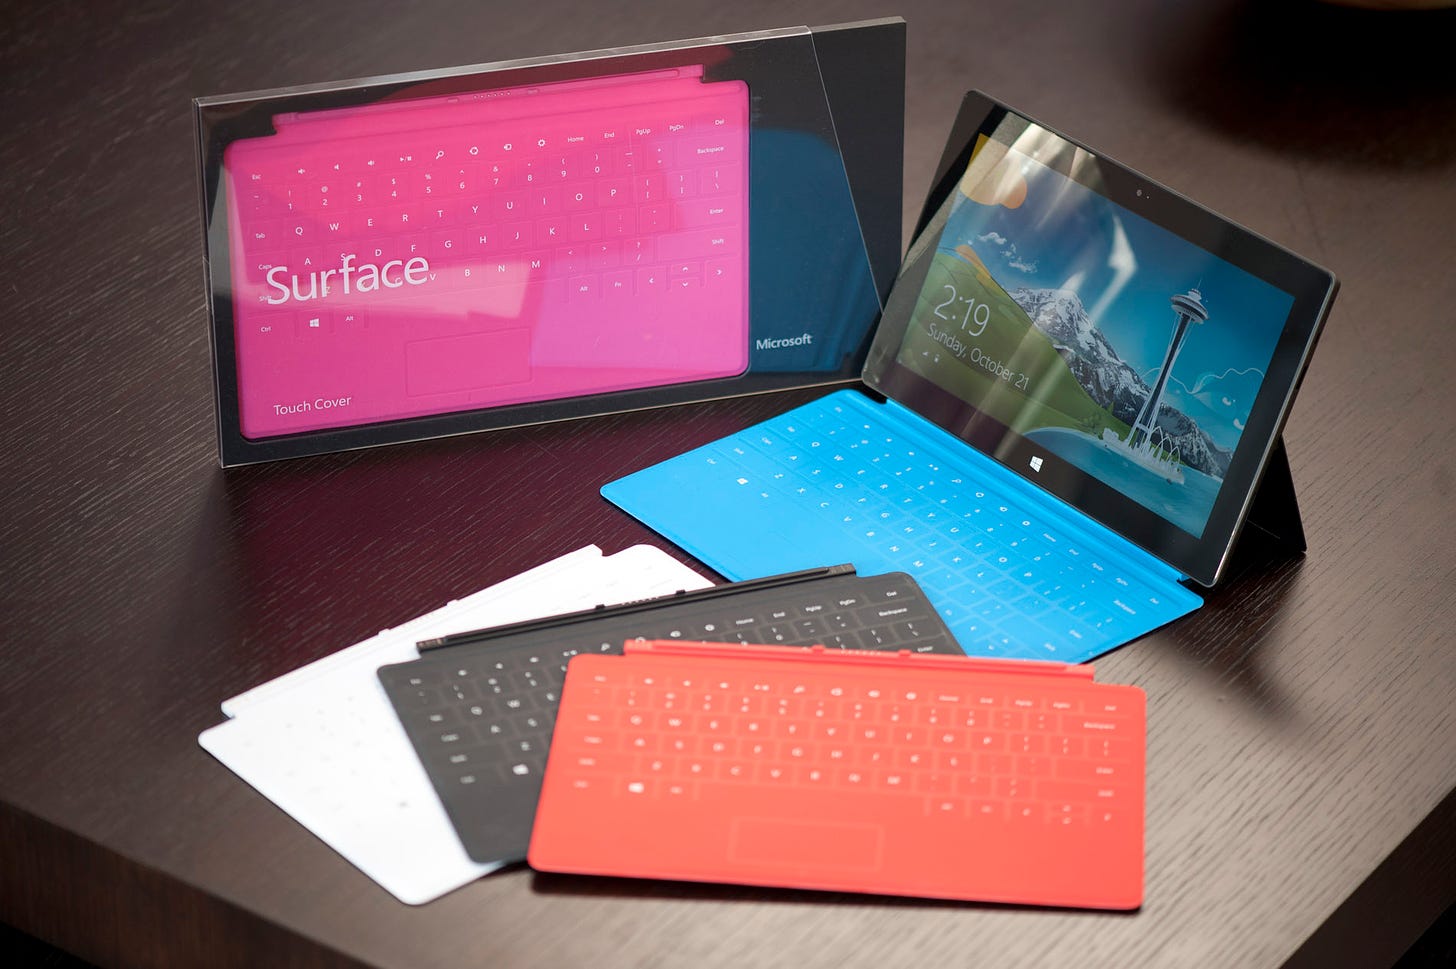 A photo of the retail box for Surface, the surface computer with a touch cover and positioned for typing. There are additional covers around the surface showing the colors.